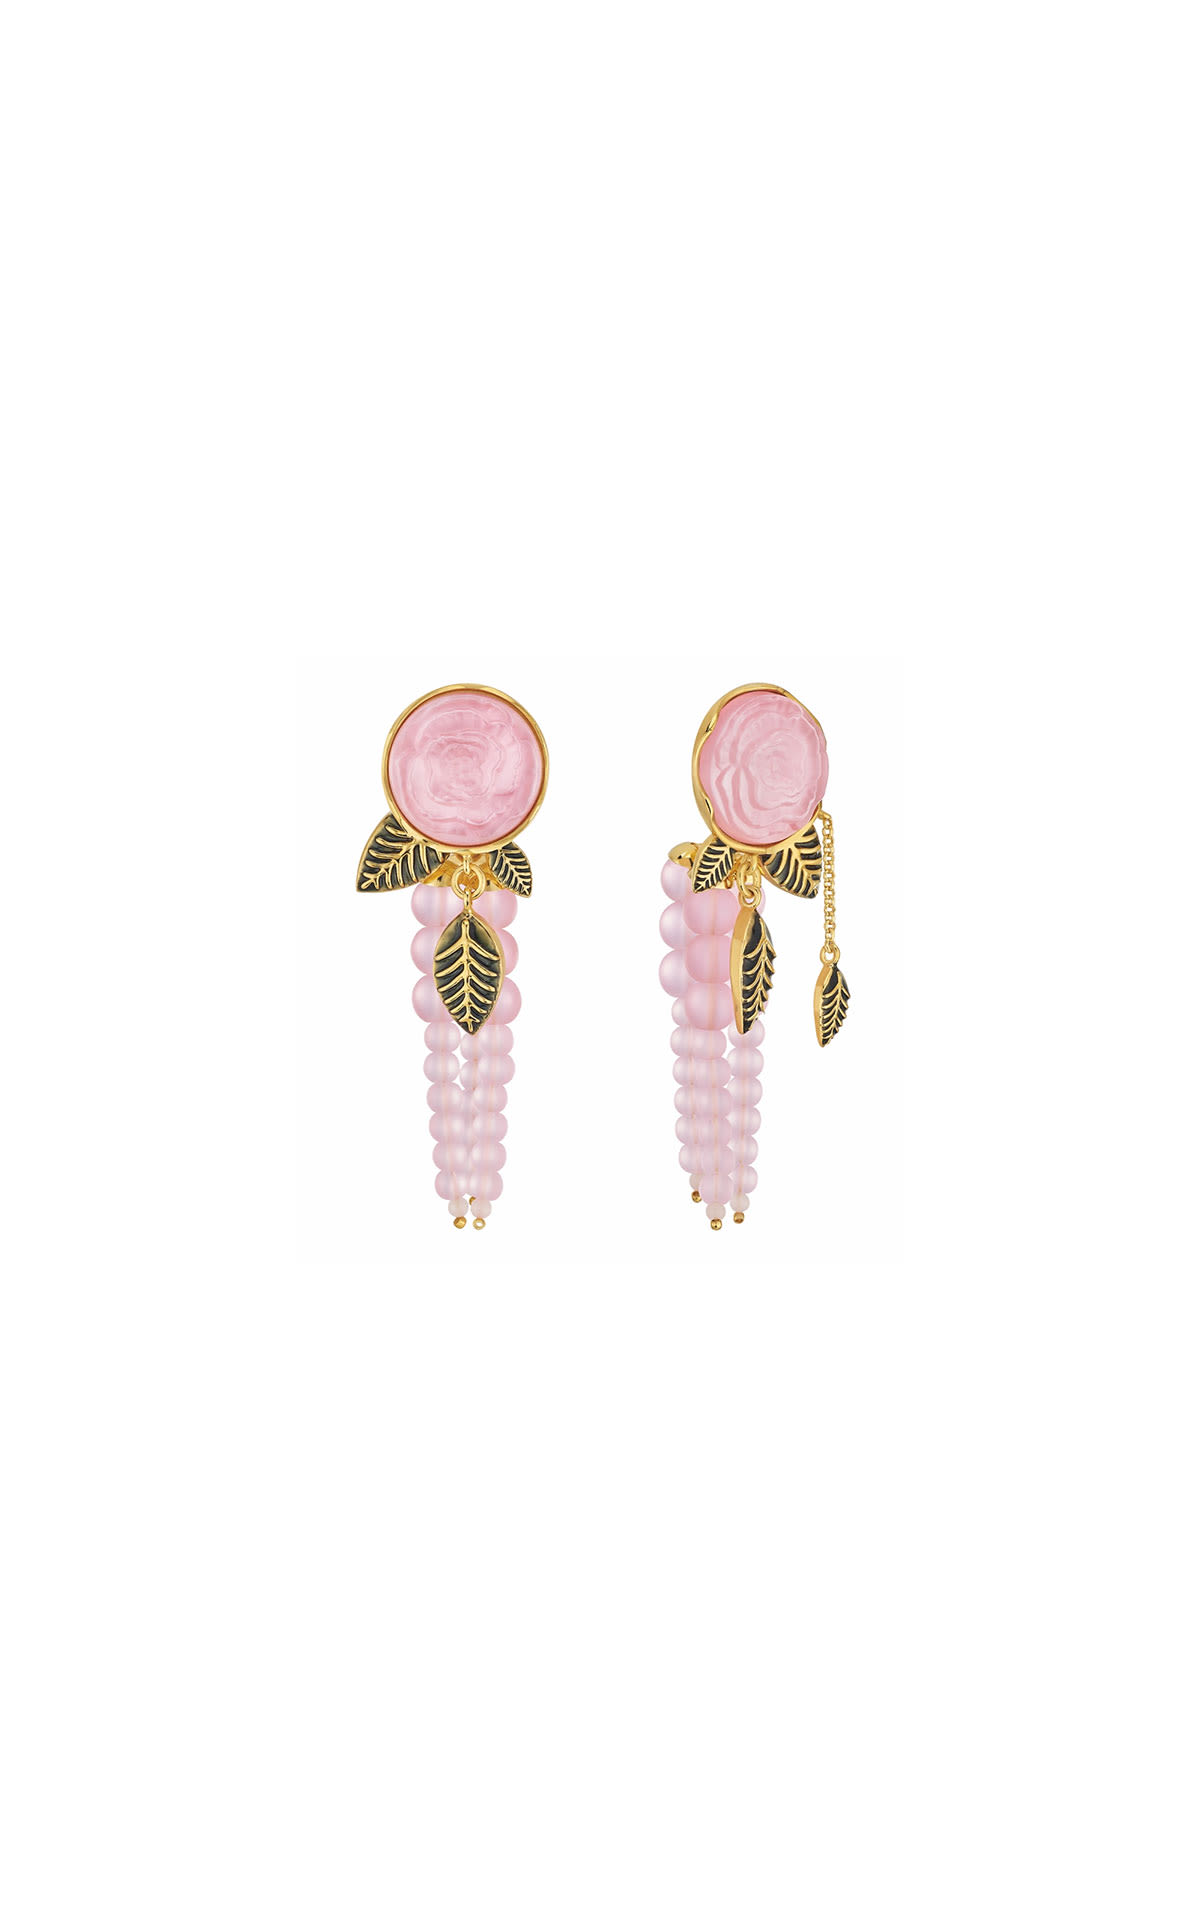 Lalique Peony pink earrings from Bicester Village